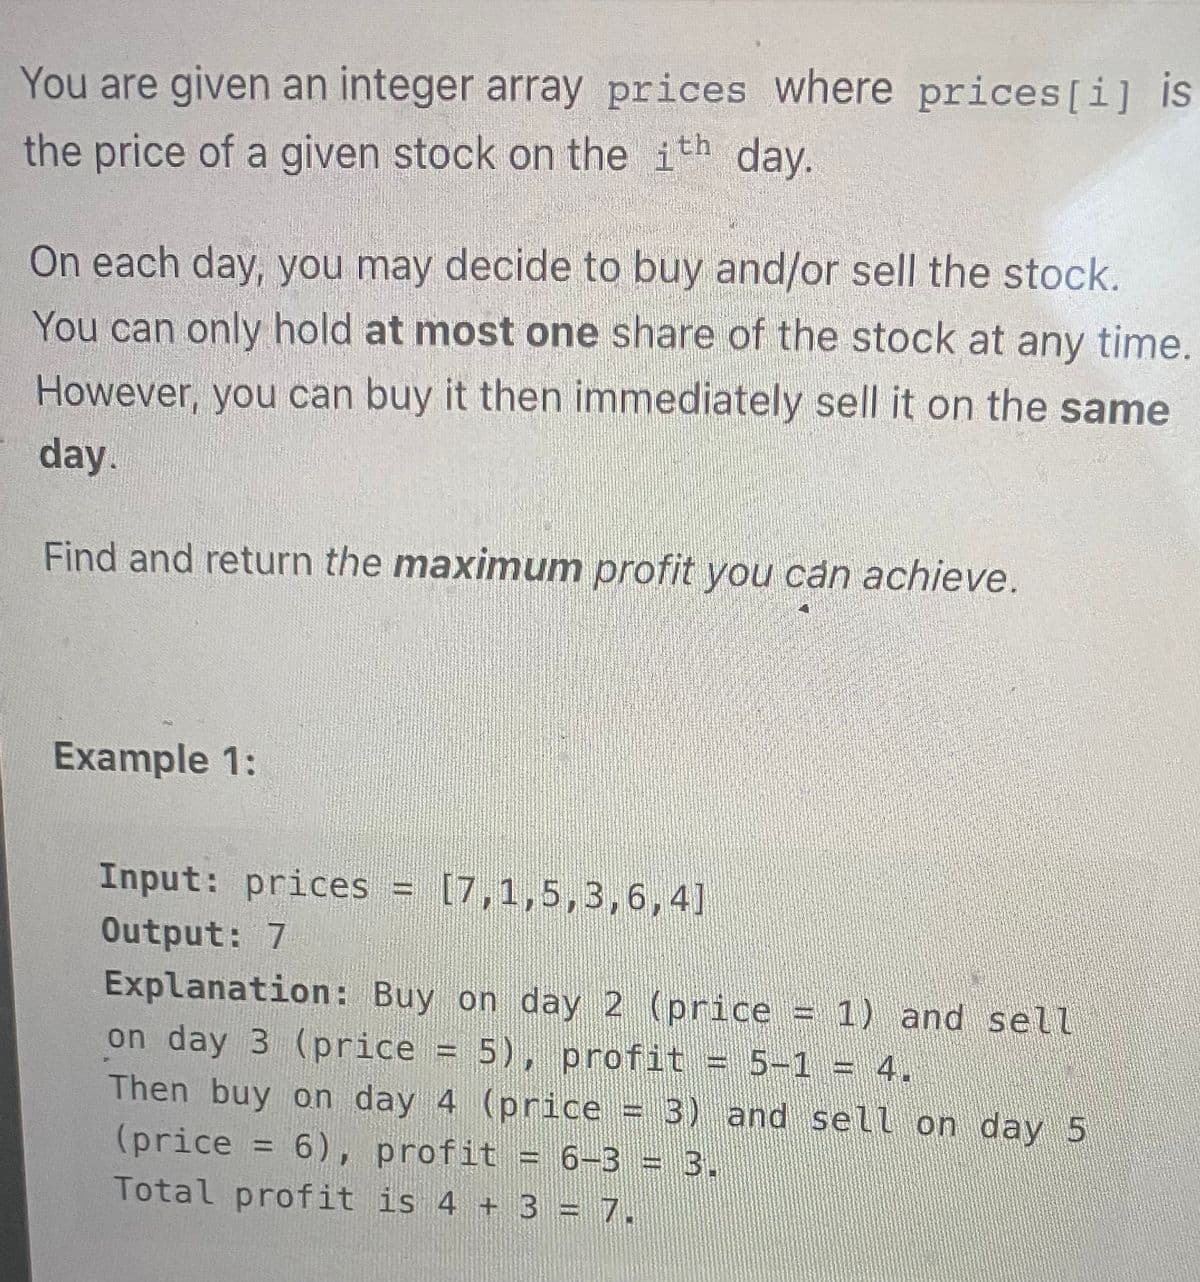 You are given an integer array prices where prices [i] is
the price of a given stock on the ith day.
On each day, you may decide to buy and/or sell the stock.
You can only hold at most one share of the stock at any time.
However, you can buy it then immediately sell it on the same
day.
Find and return the maximum profit you can achieve.
Example 1:
Input: prices = [7,1,5,3,6,4]
Output: 7
Explanation: Buy on day 2 (price = 1) and sell
on day 3 (price 5), profit = 5-1 = 4.
Then buy on day 4 (price = 3) and sell on day 5
(price 6), profit 6-3 = 3.
Total profit is 4 + 3 = 7.